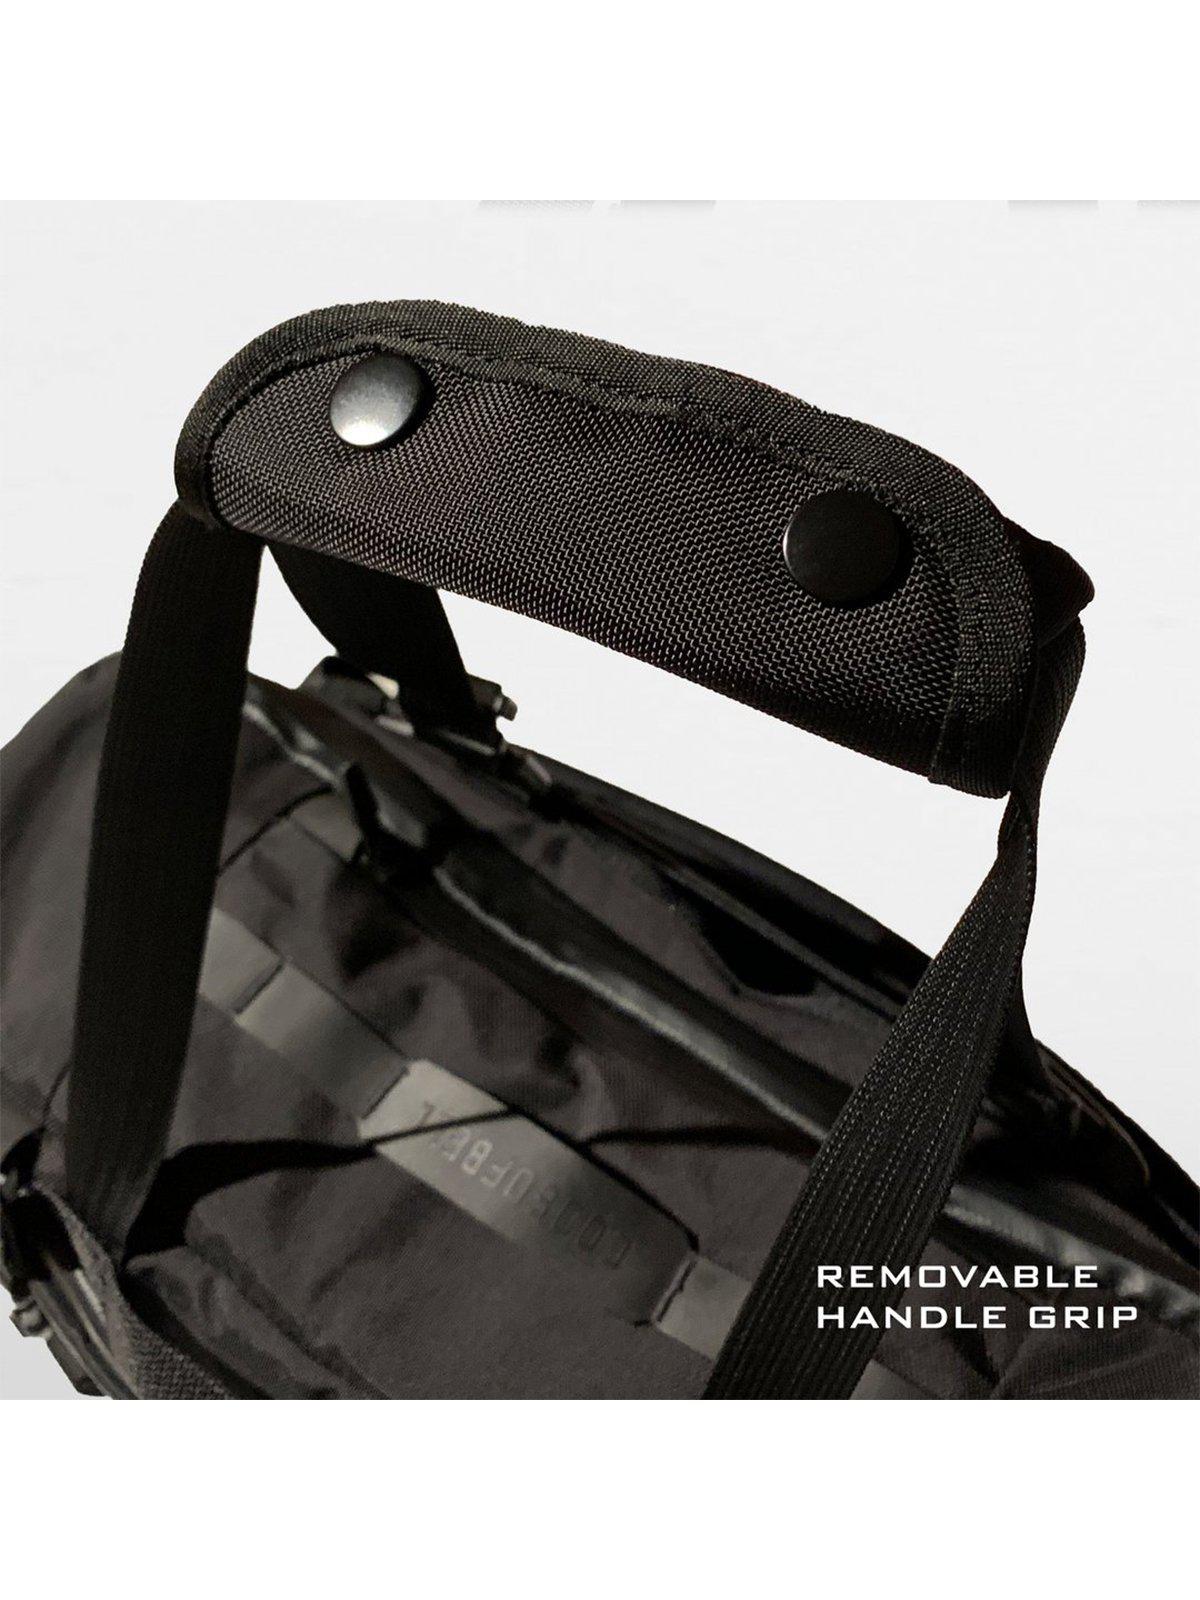 Code Of Bell X-TOTE 3 Way Messenger Tote Pitch Black